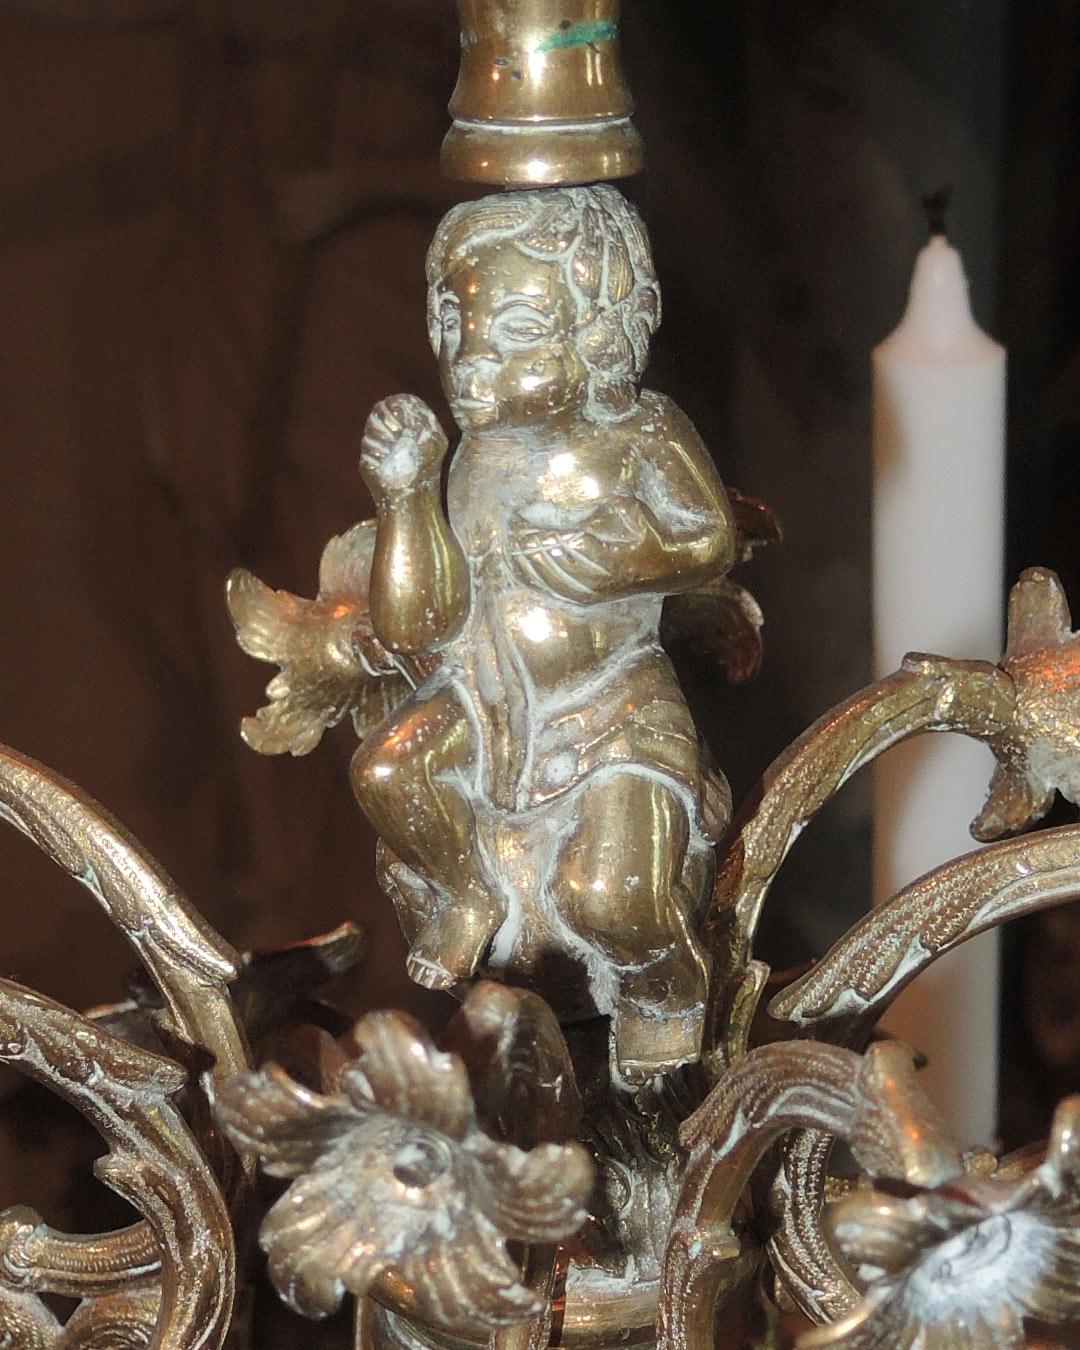 Putto on one of three known documented crowns by Carl Edberg, this one from 1788.